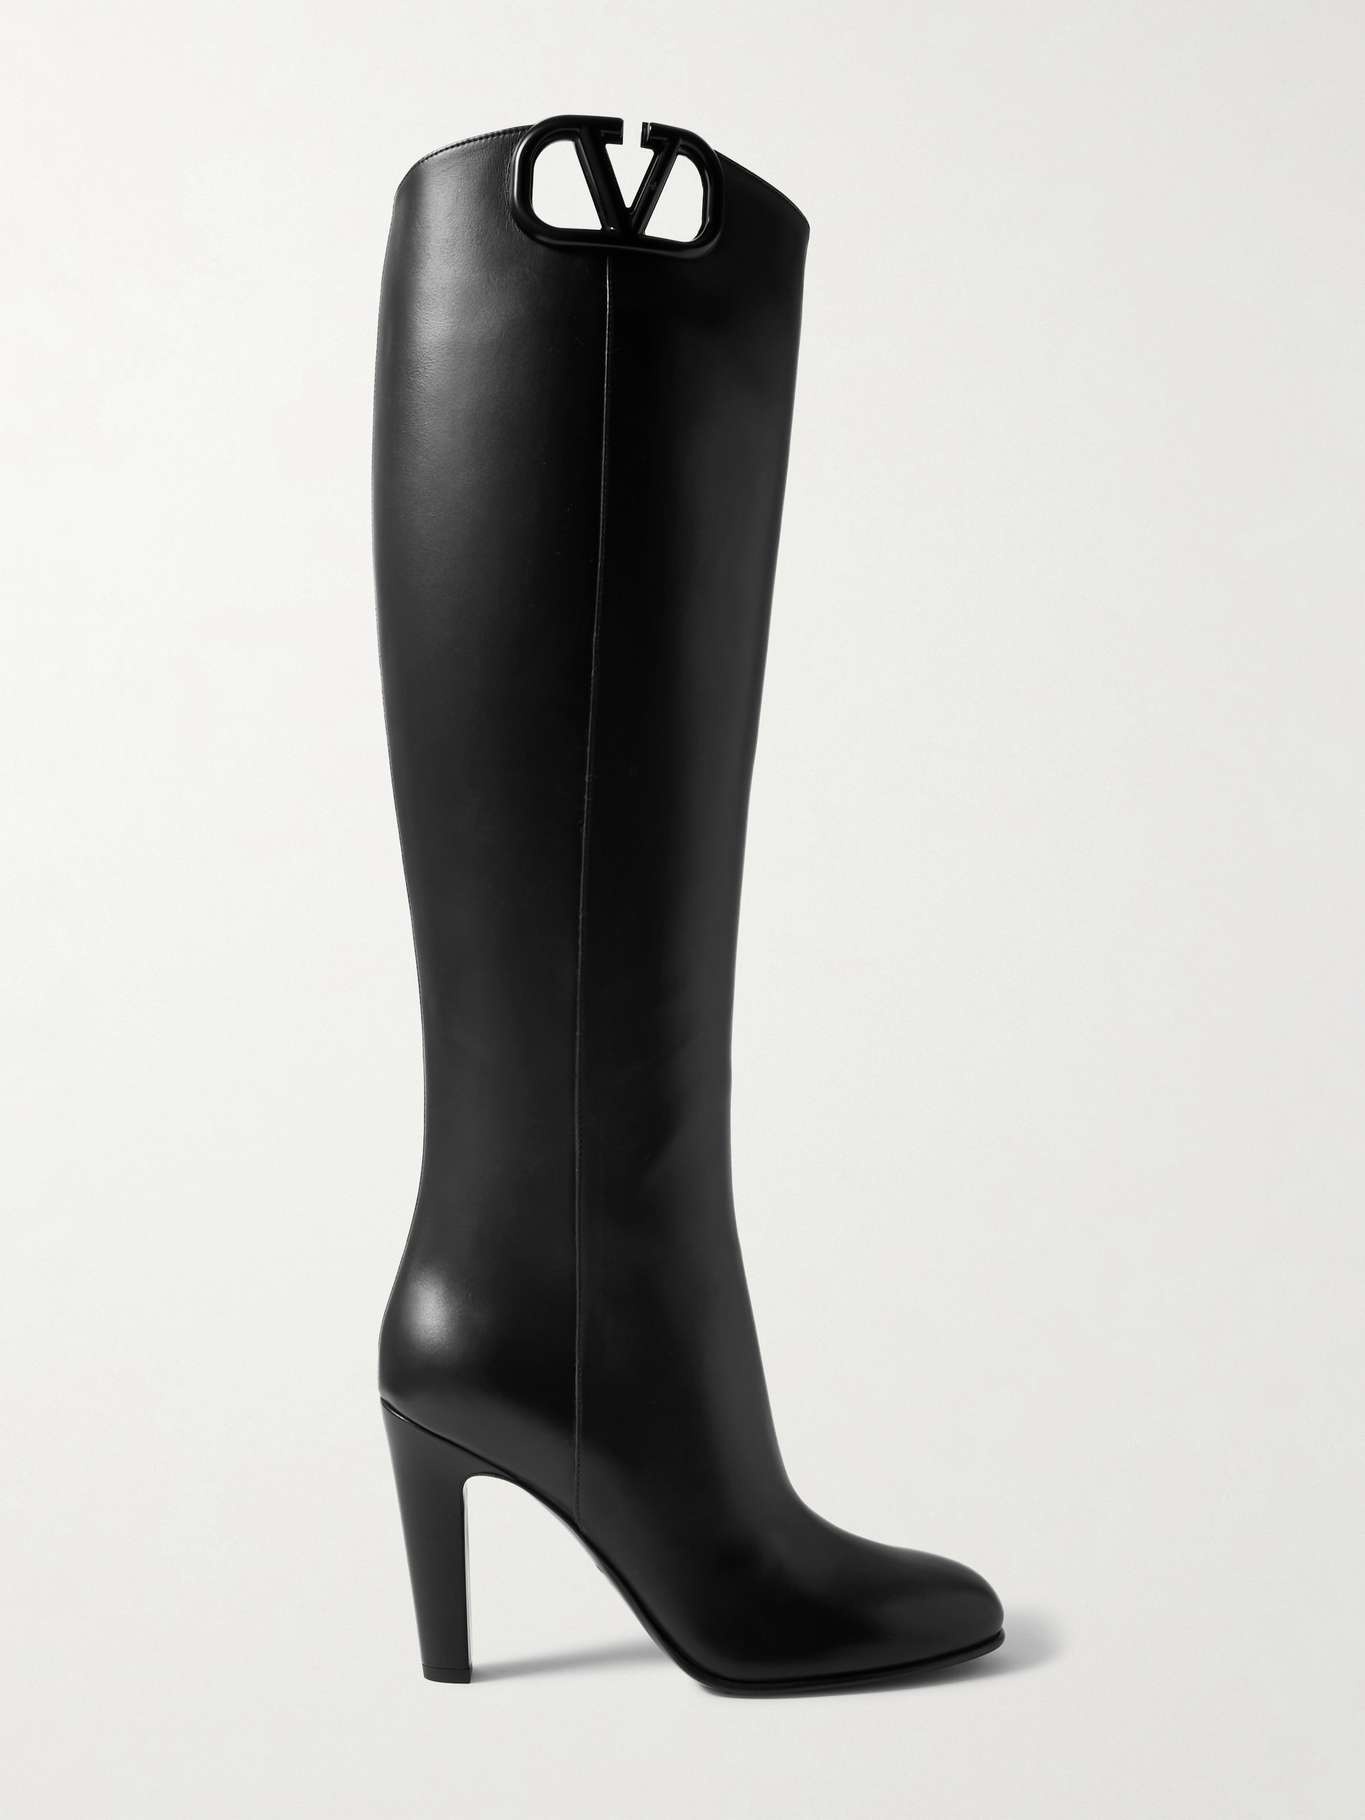 VLOGO 100 leather knee boots - 1